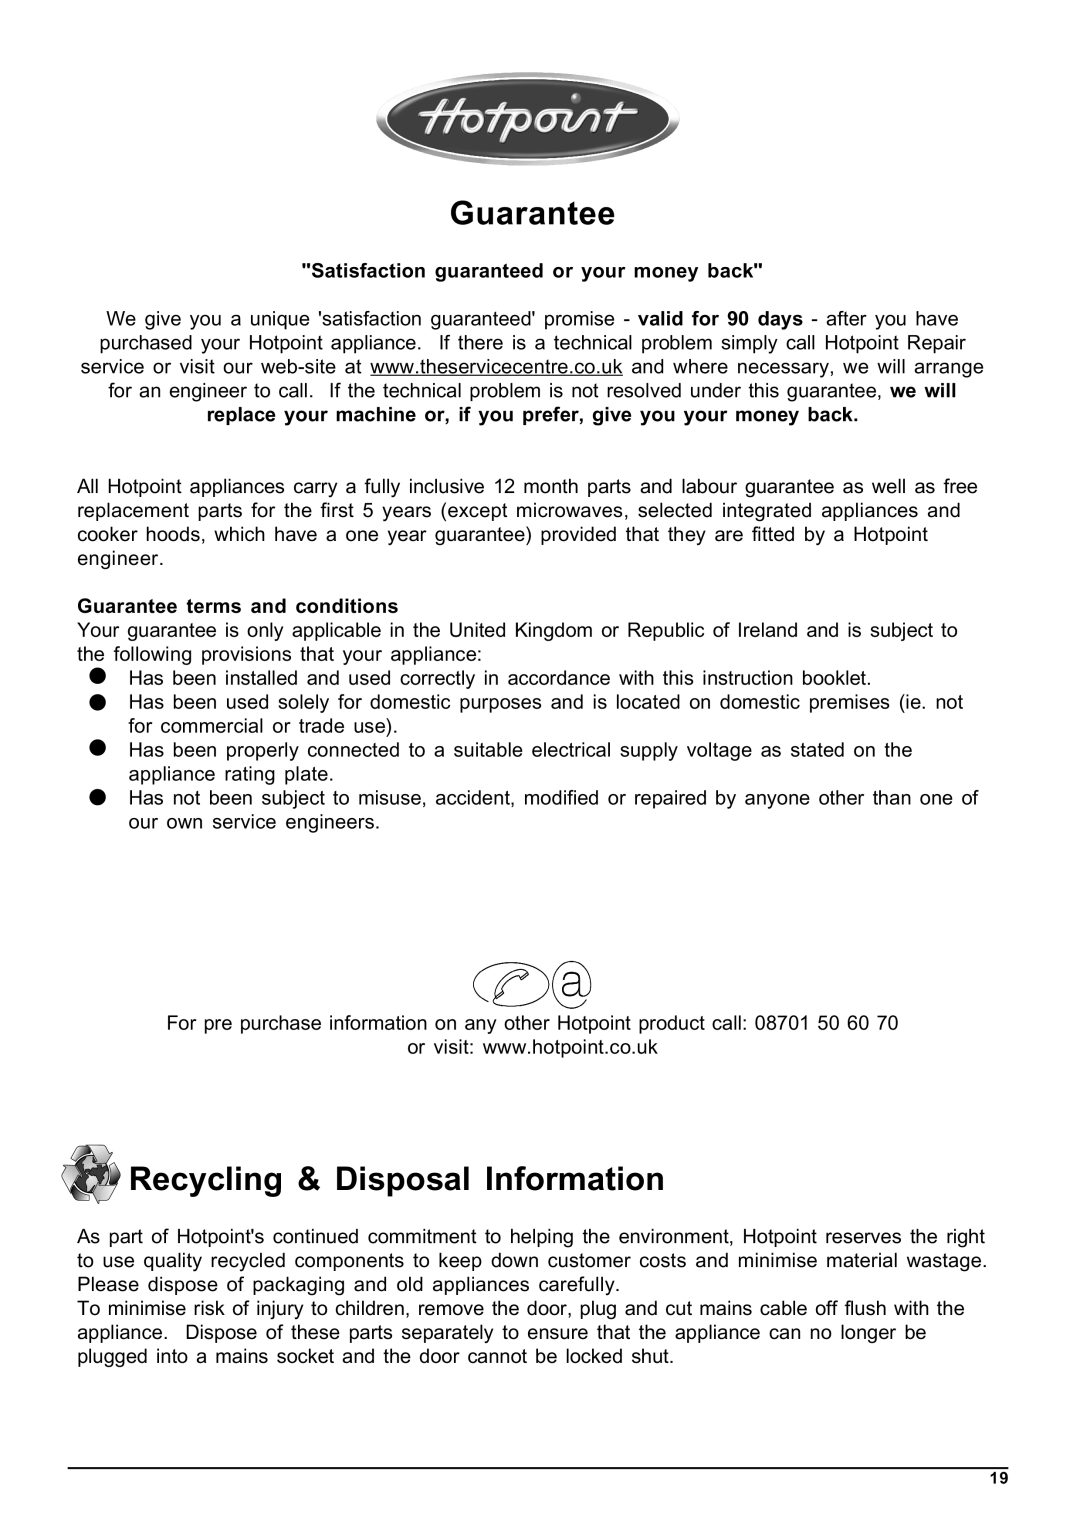 Hotpoint Instructions manual Guarantee, Recycling & Disposal Information, Satisfaction guaranteed or your money back 